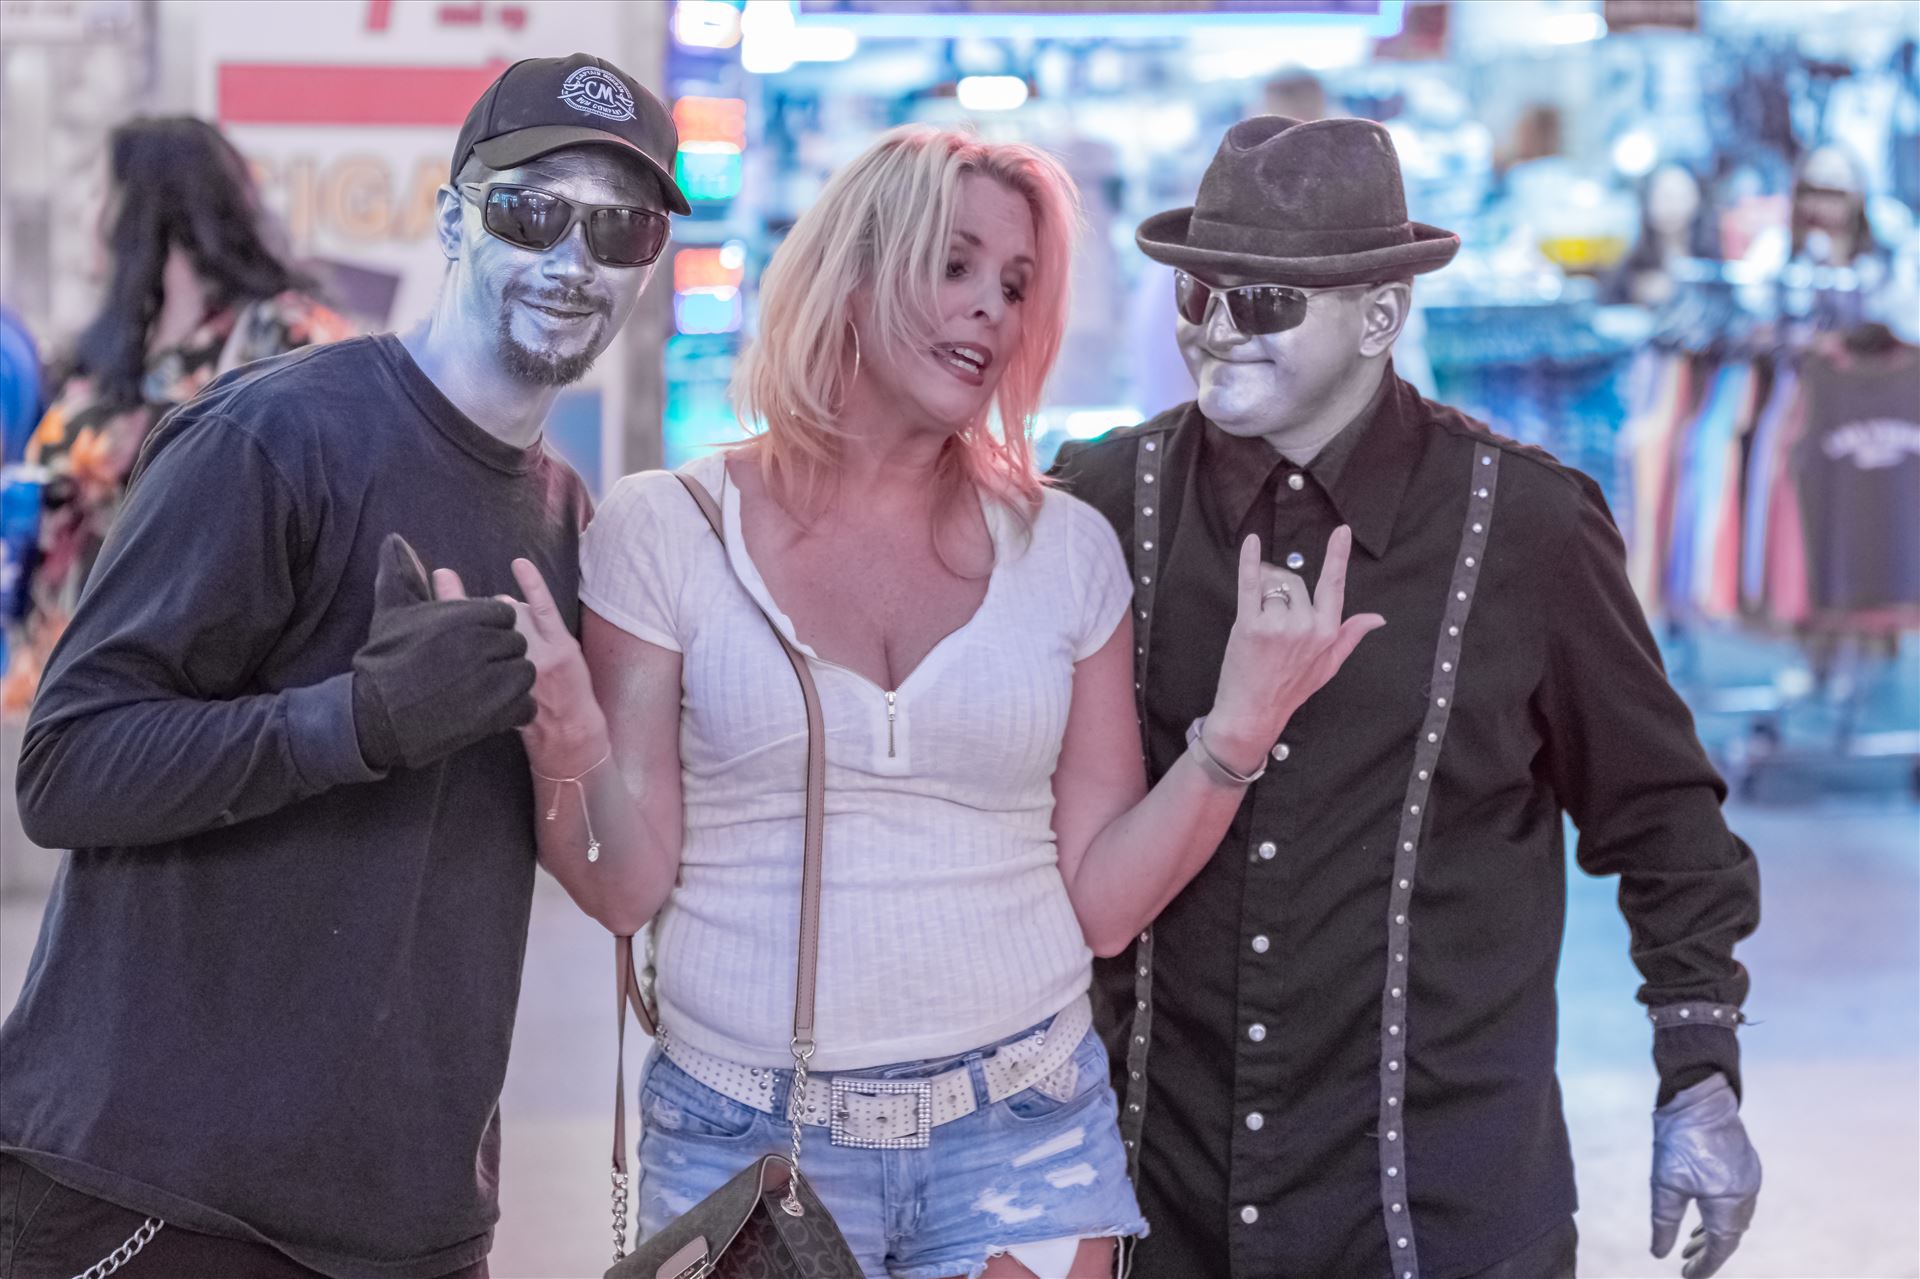 Fremont Street Experence with Tonya and make me move guys-8502636.jpg  by Terry Kelly Photography